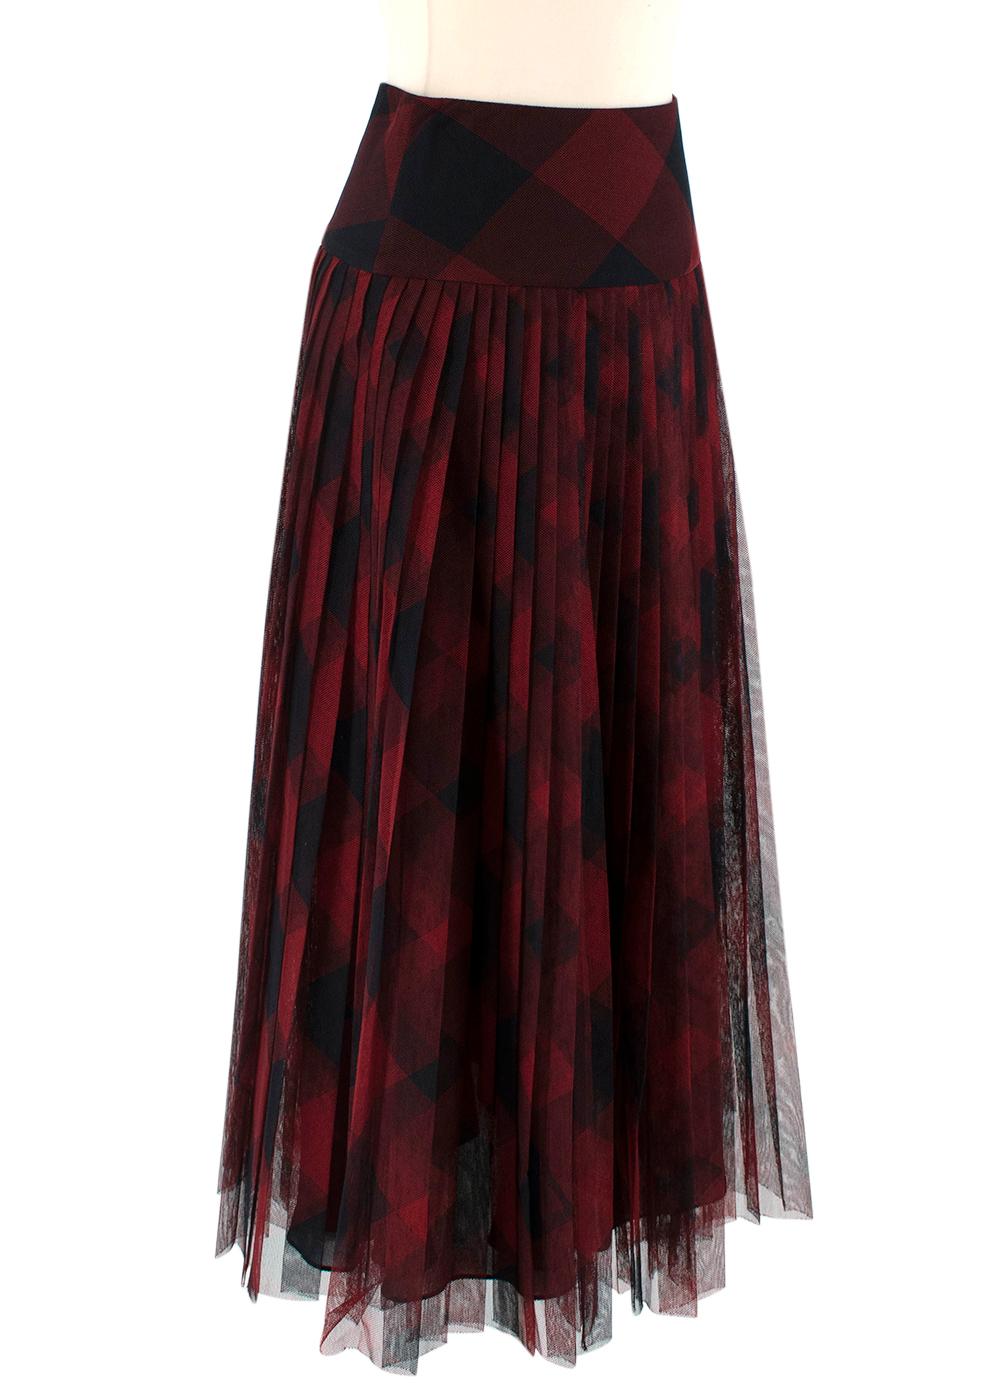 Dior Black & Red Tulle Signature Midi Skirt

The red and black midi skirt is cut in tulle, a signature material of the House. 

- Fitted Waist 
- Pleated Skirt
- Concealed side Zip closure 
- Mid-length
- Fully lined 


Materials 
53% Polyester
47%